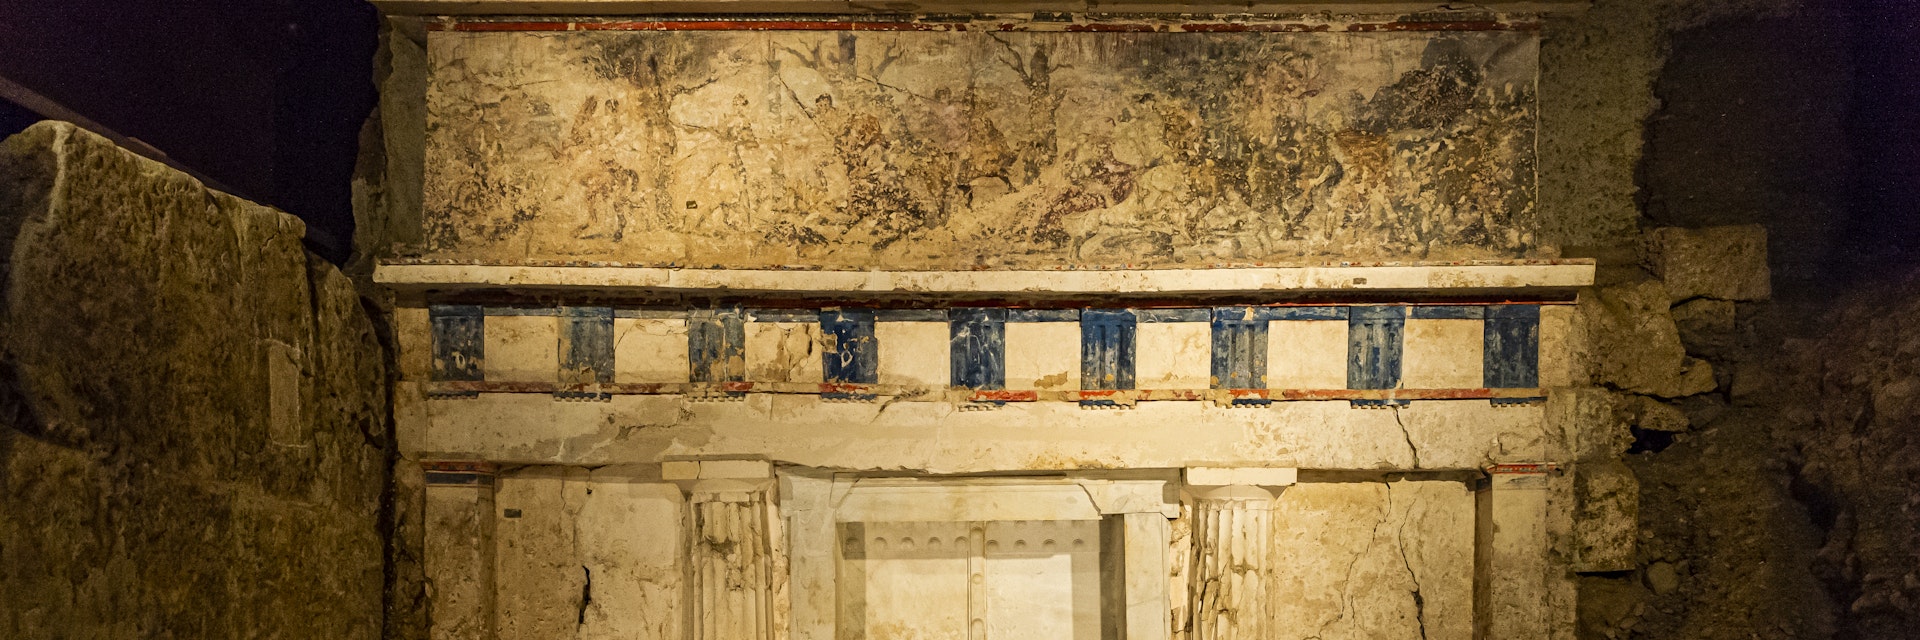 1303580786
architectural, artistic, creative, mural painting, mural paintings, murals, nighttime, no one, no person, nobody, outdoor, outside, paintings, past, stone, tomb of phillip ii, vergina, worn